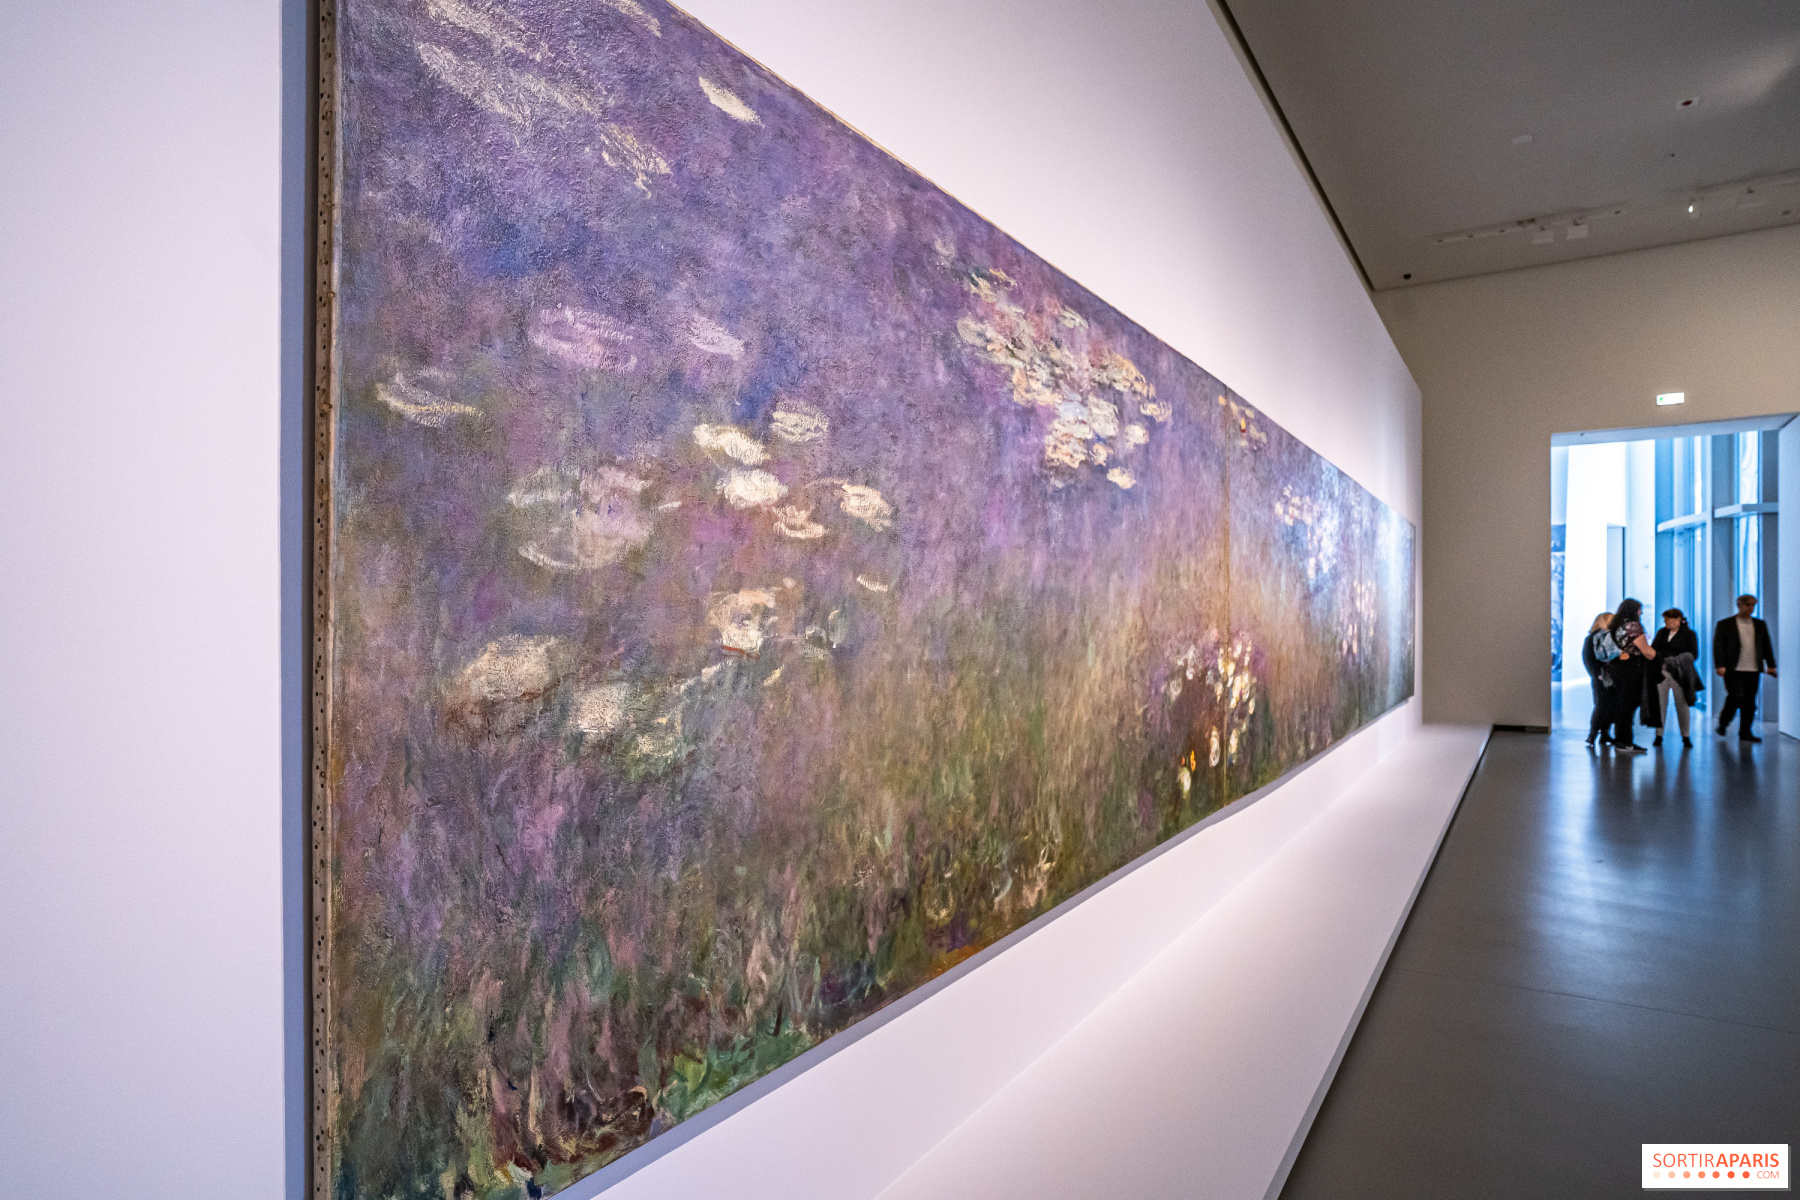 Monet — Mitchell at Fondation Louis Vuitton is the year's most